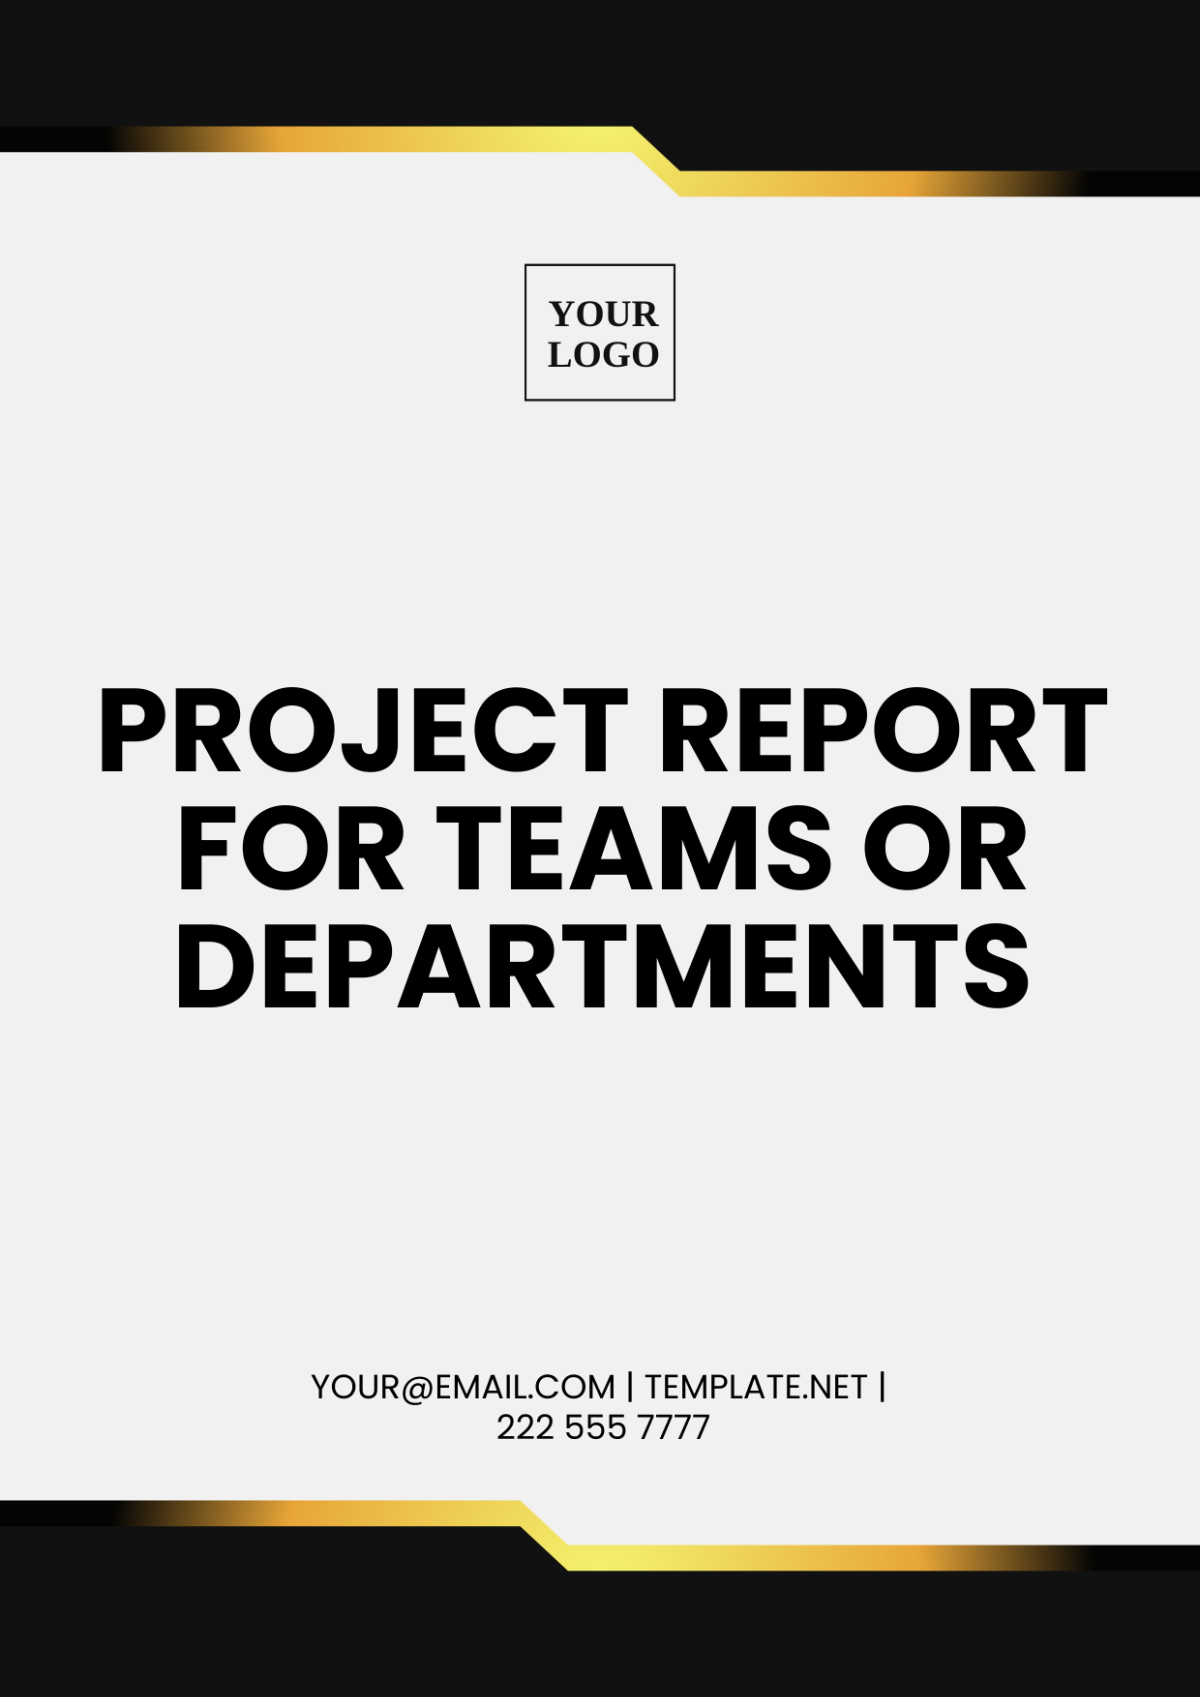 Project Report For Teams Or Departments Template